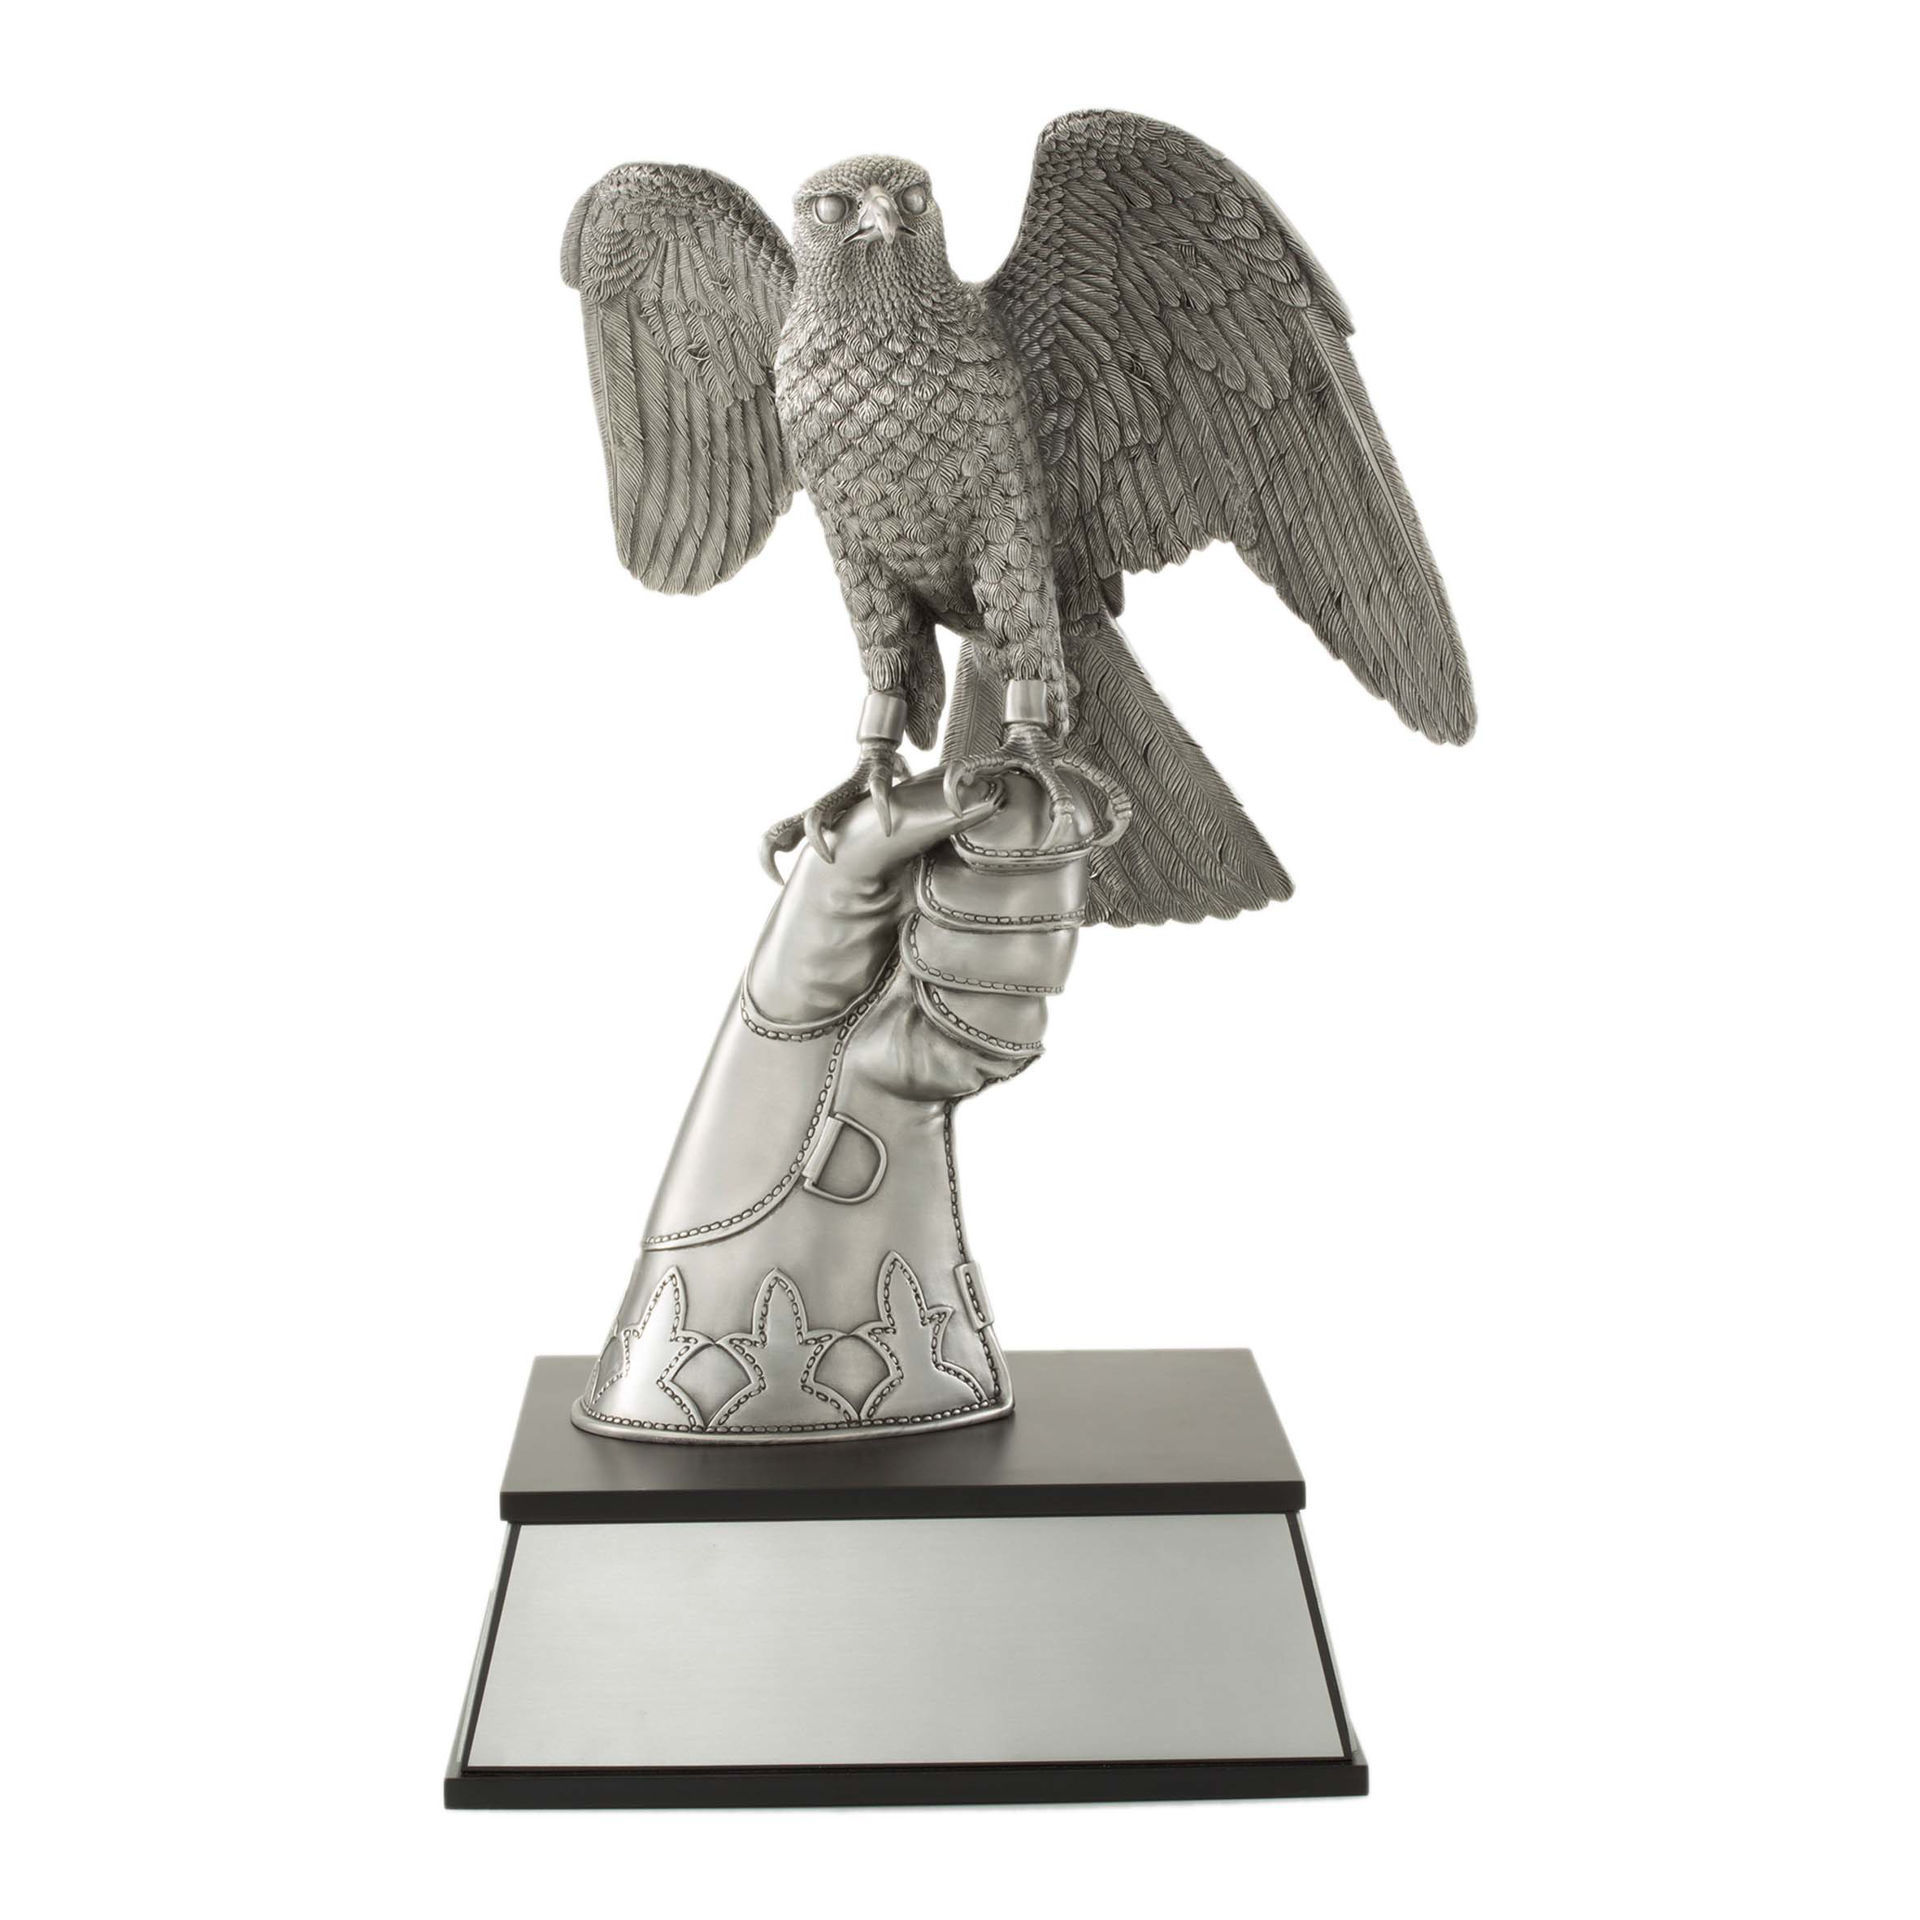 Picture of Arabian Falcon Perched on Hand Sculpture - Pewter Satin Finish